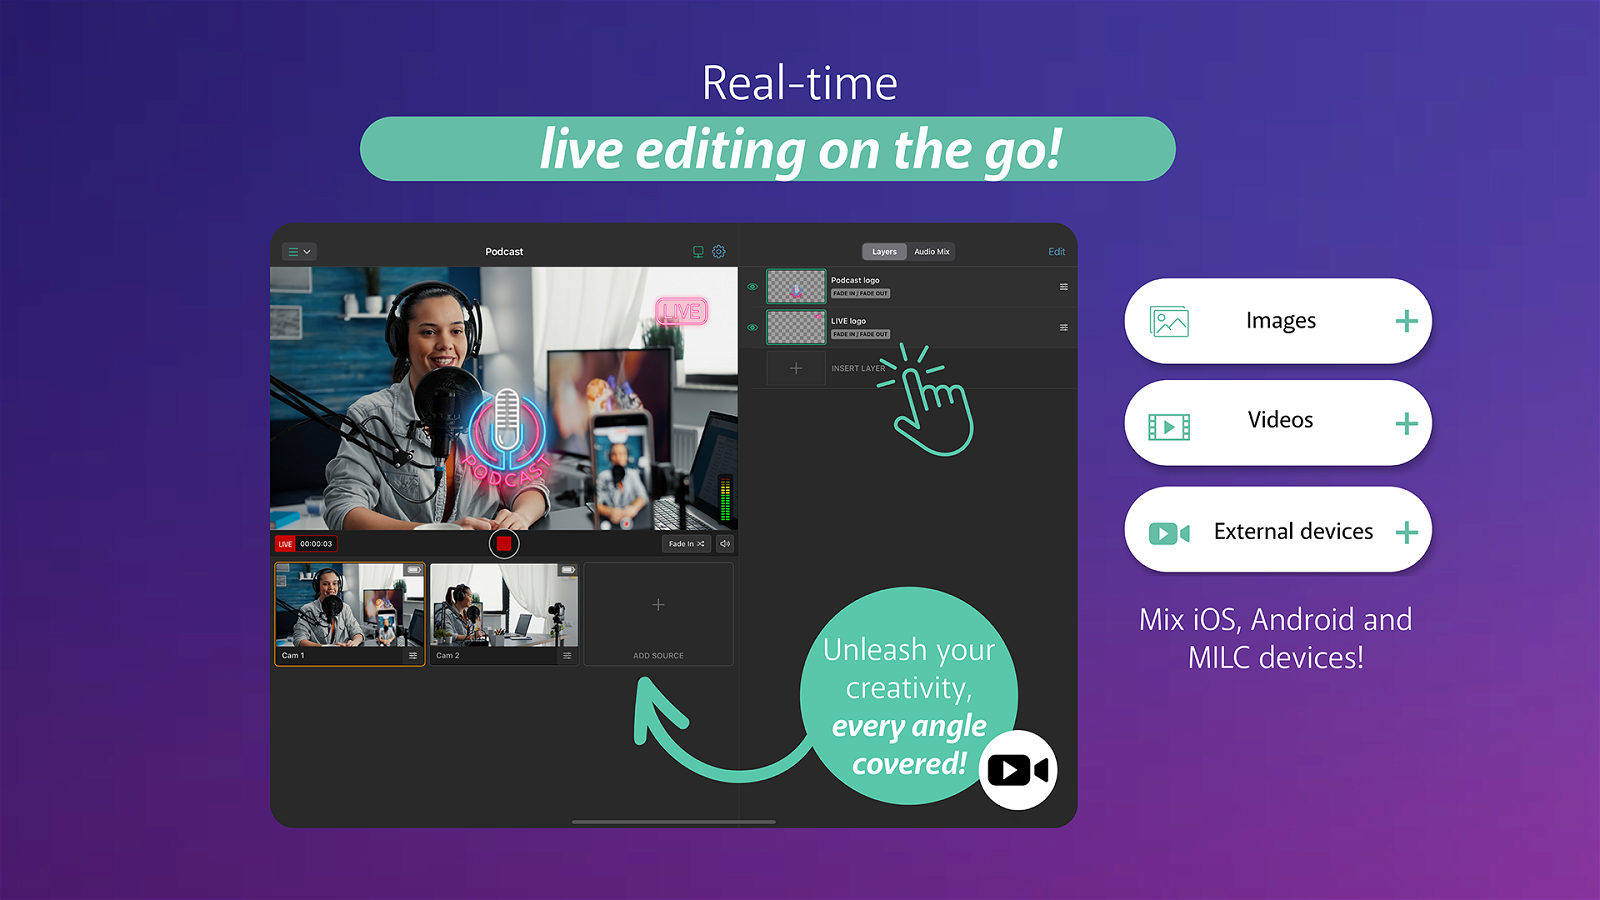 Real-time editing